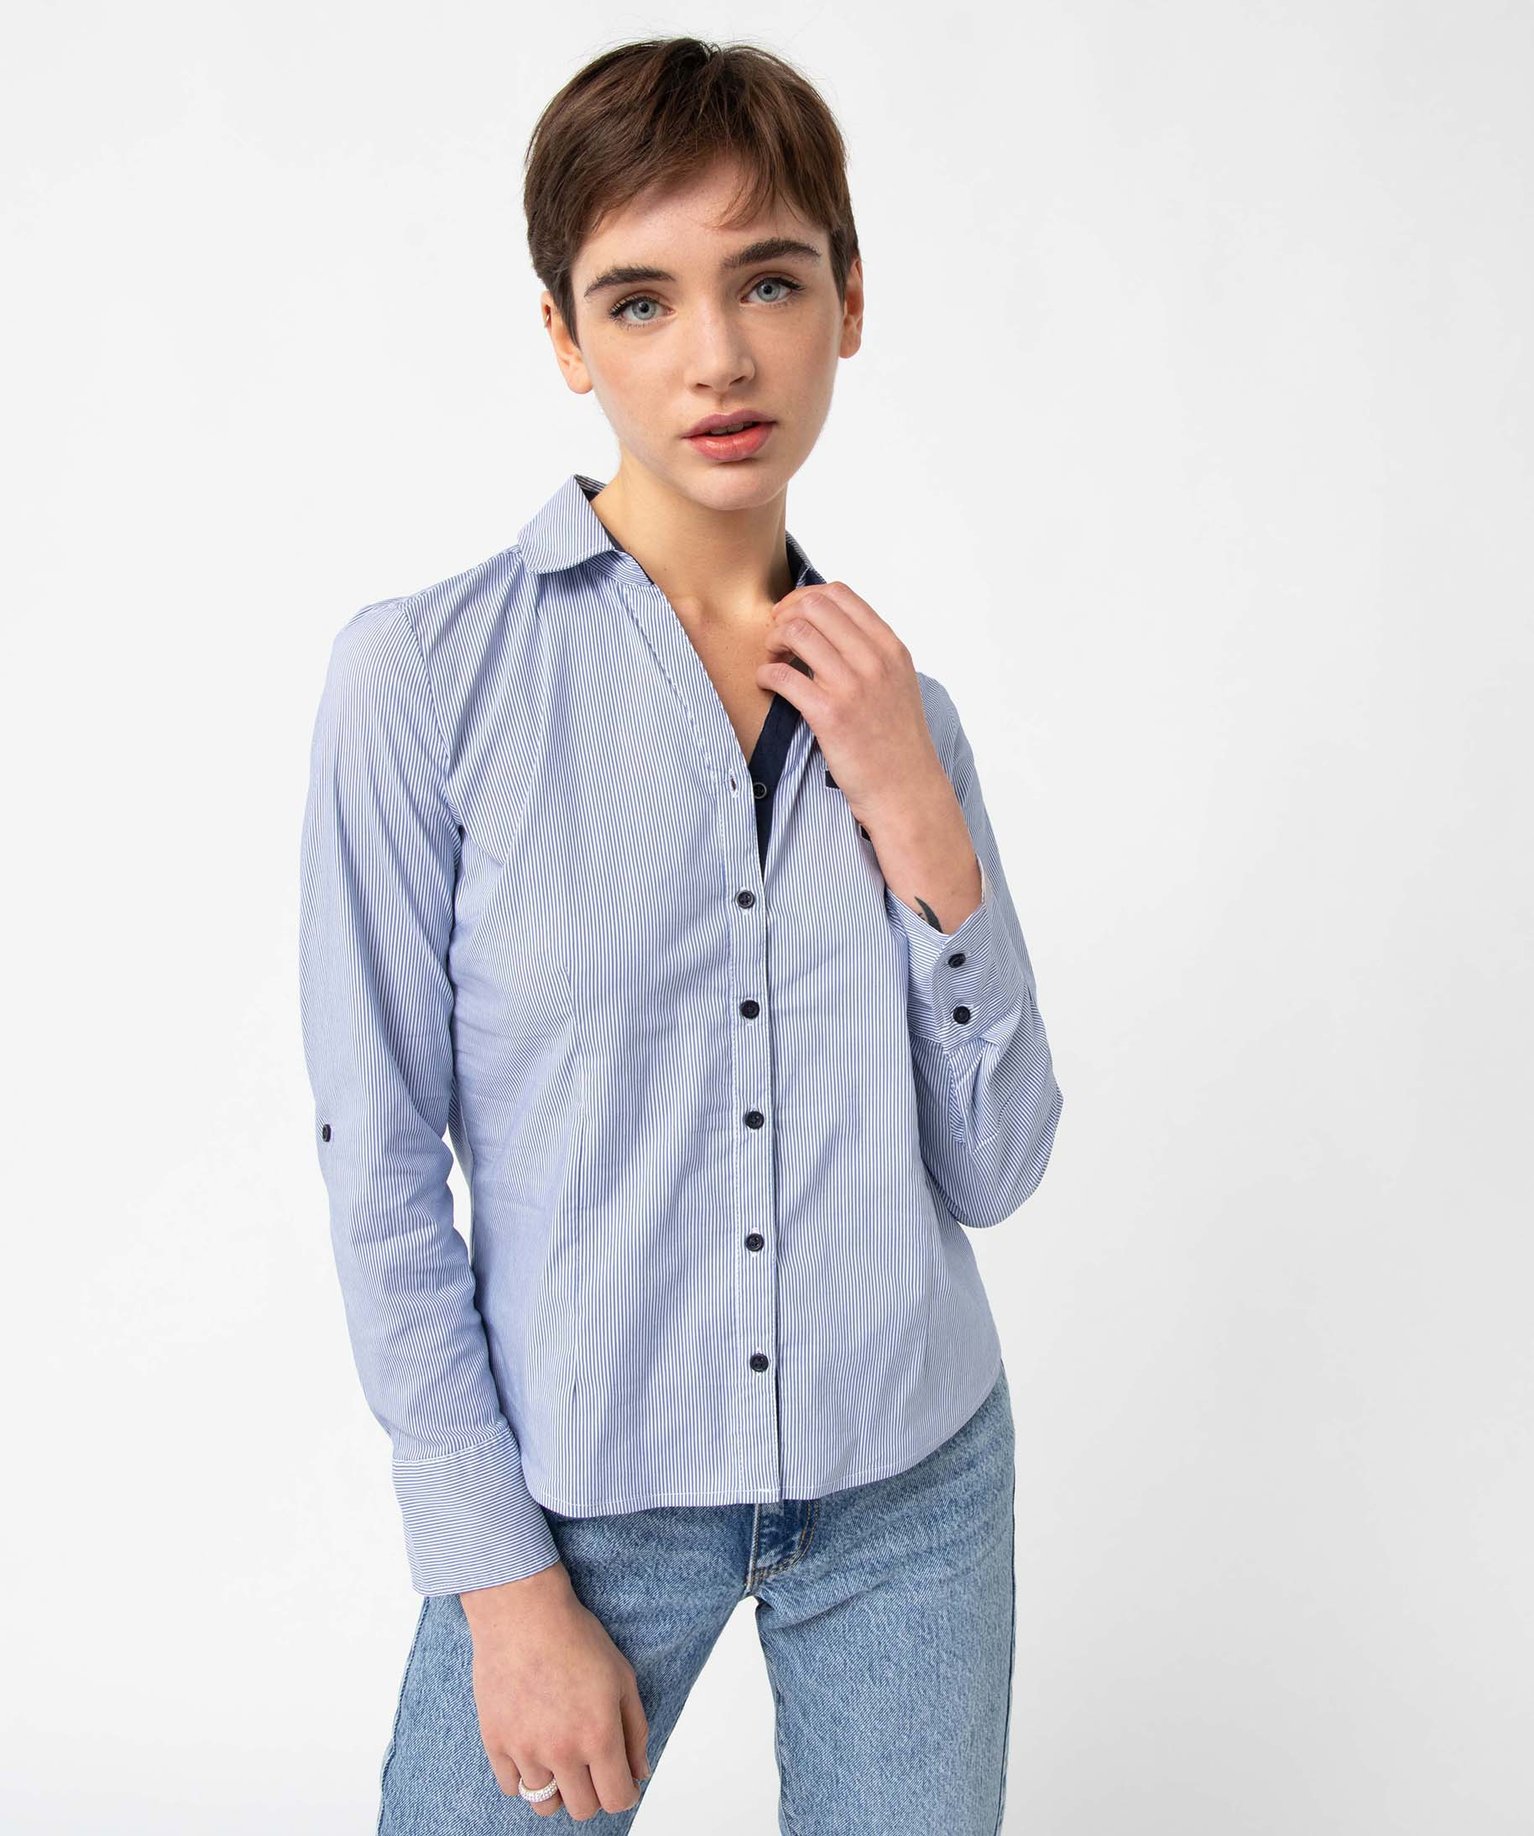 chemise femme rayee coupe ajustee en coton stretch imprime chemisiers